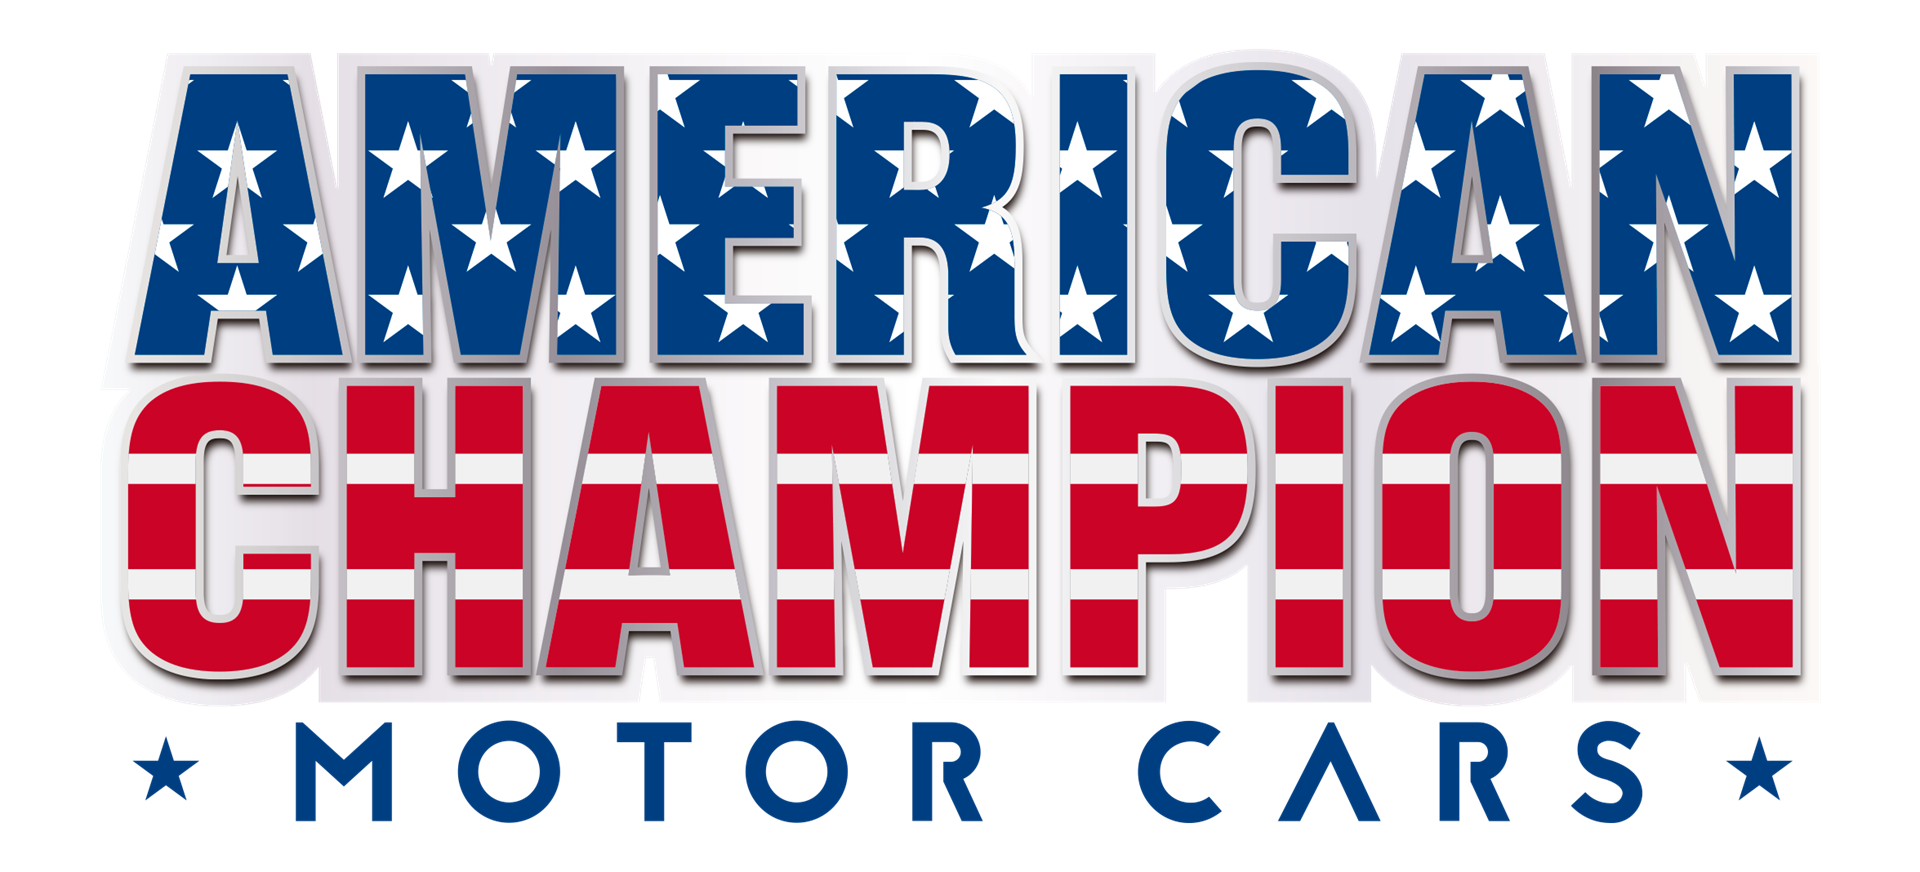 Pre Owned Cars and Trucks in Stuart - American Champion